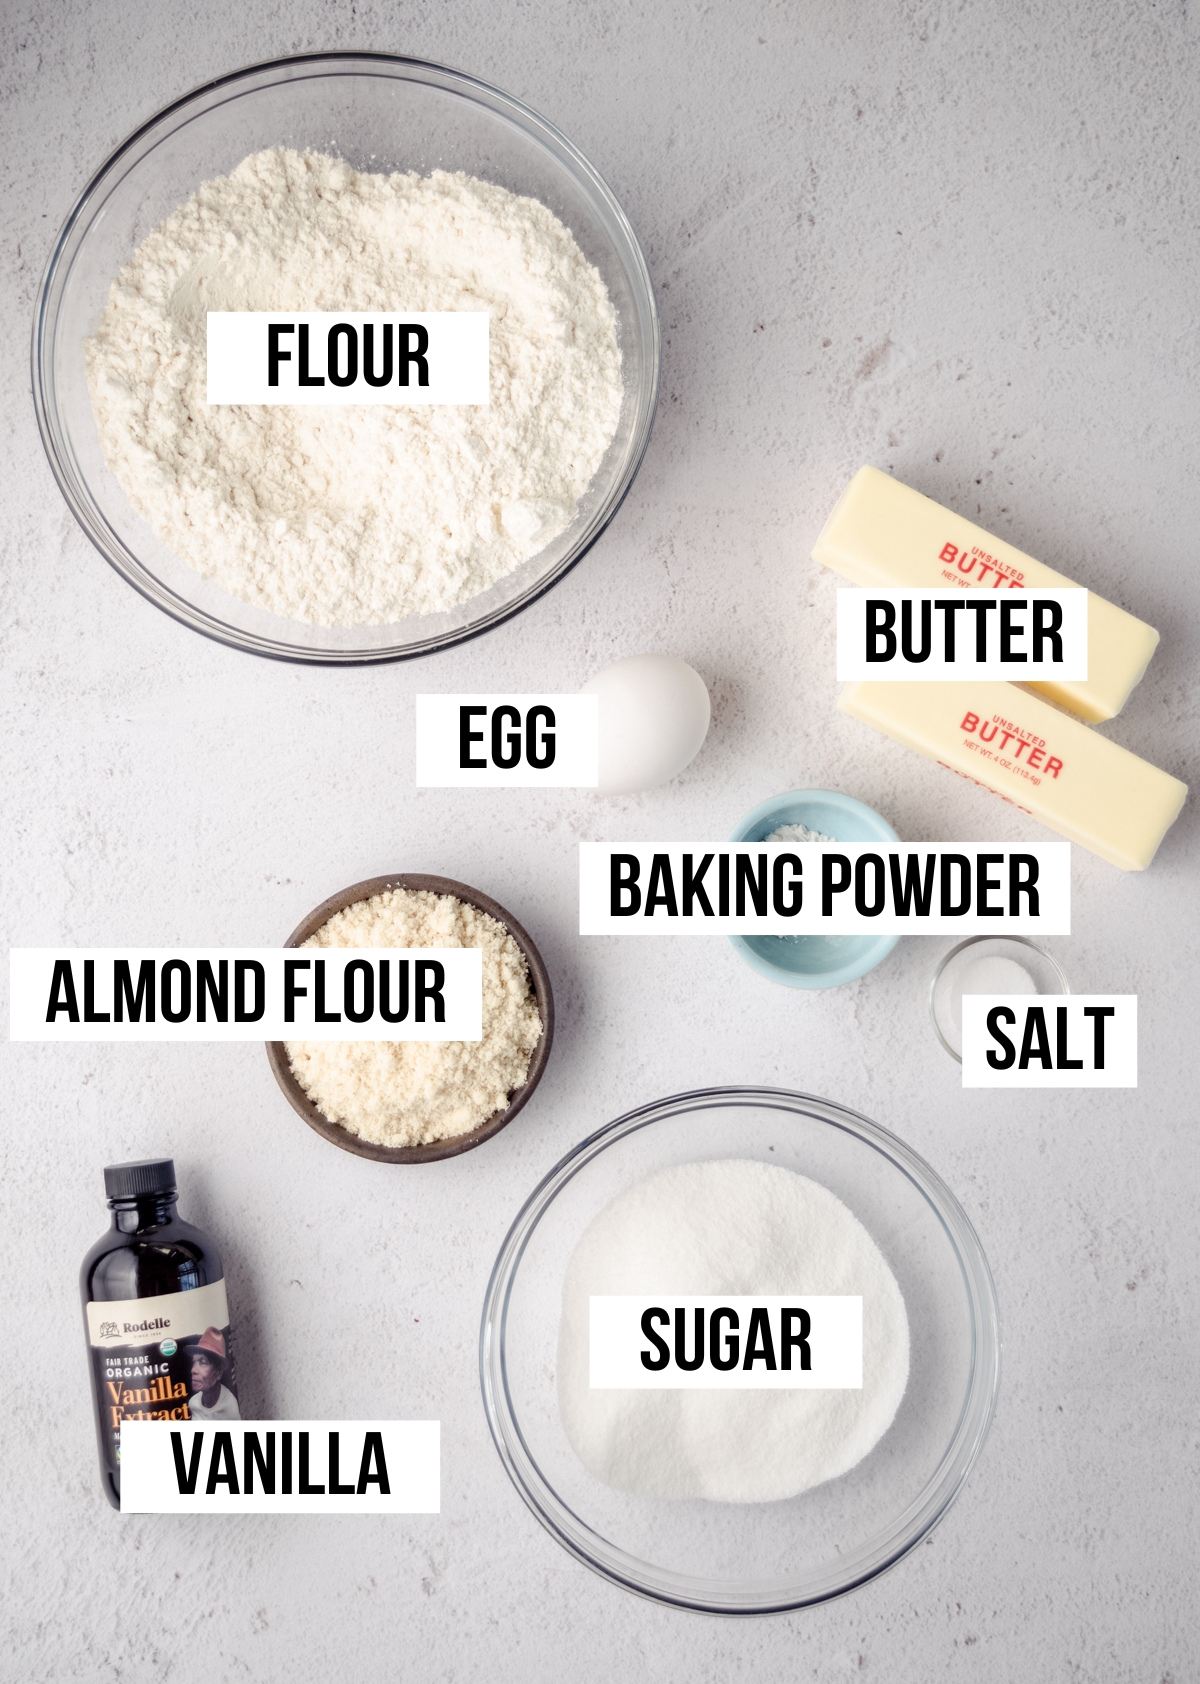 Ingredients for raspberry Linzer cookies with text overlay.